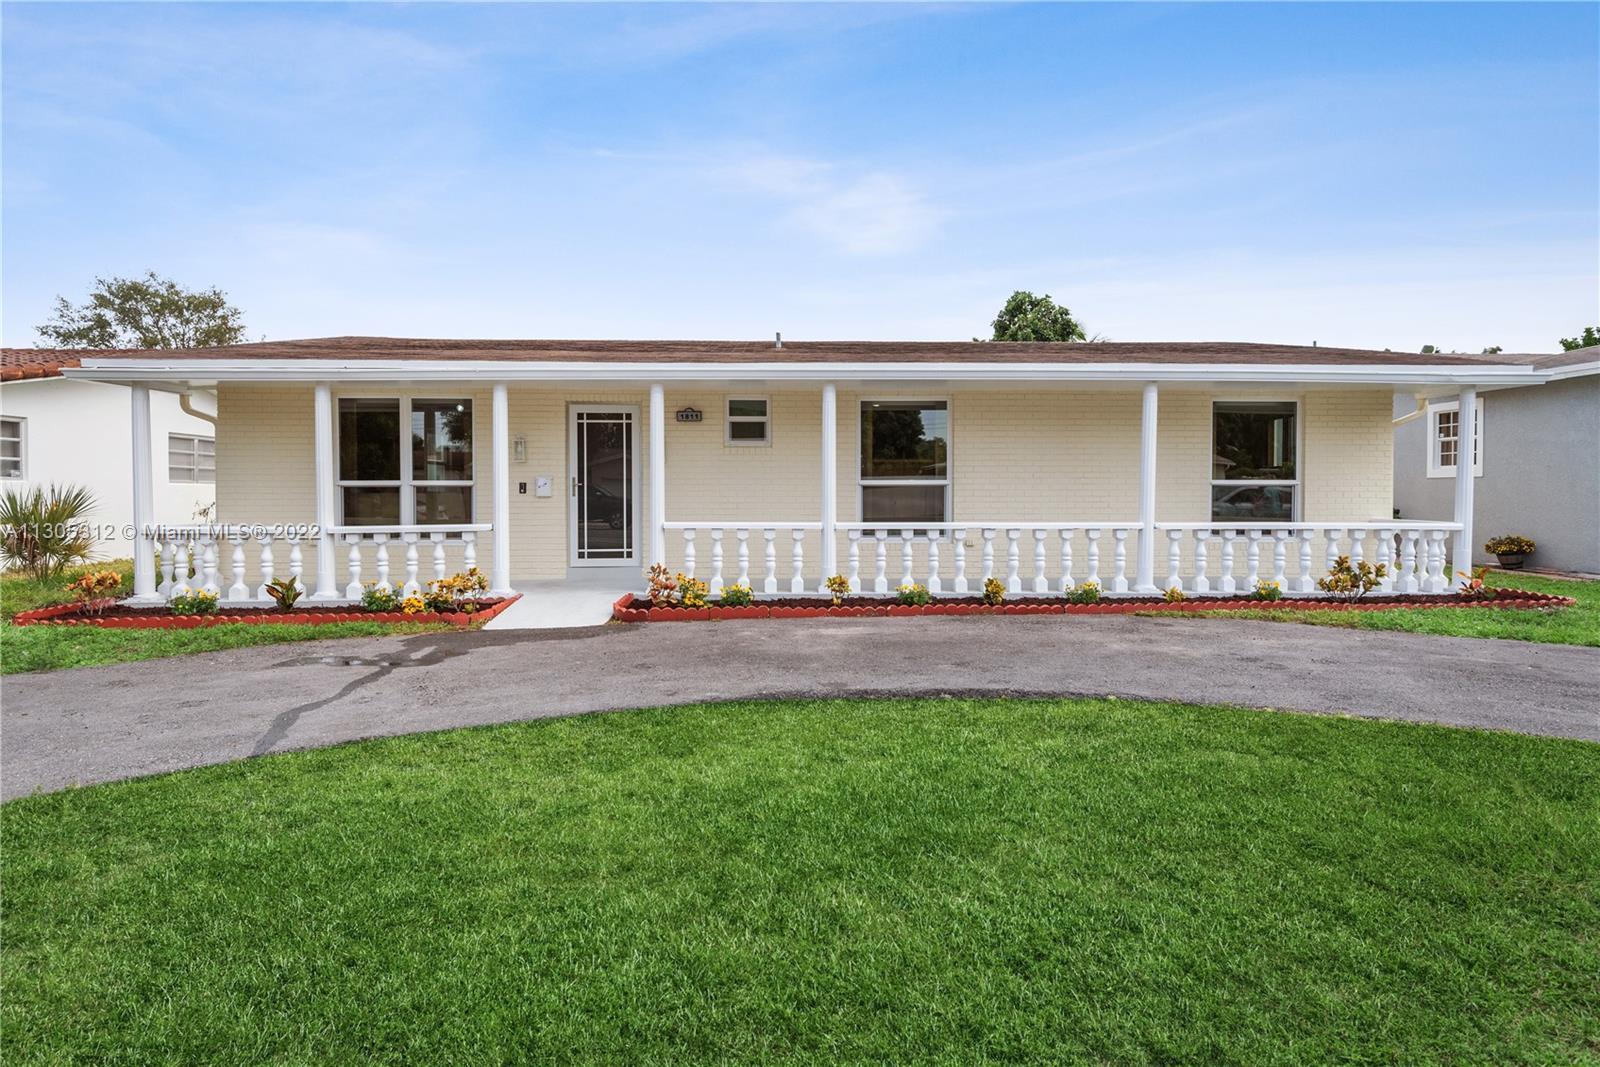 Great family home w/ plenty of room for family gatherings! This fully remodeled 4 Bedroom 2 Bath Hol